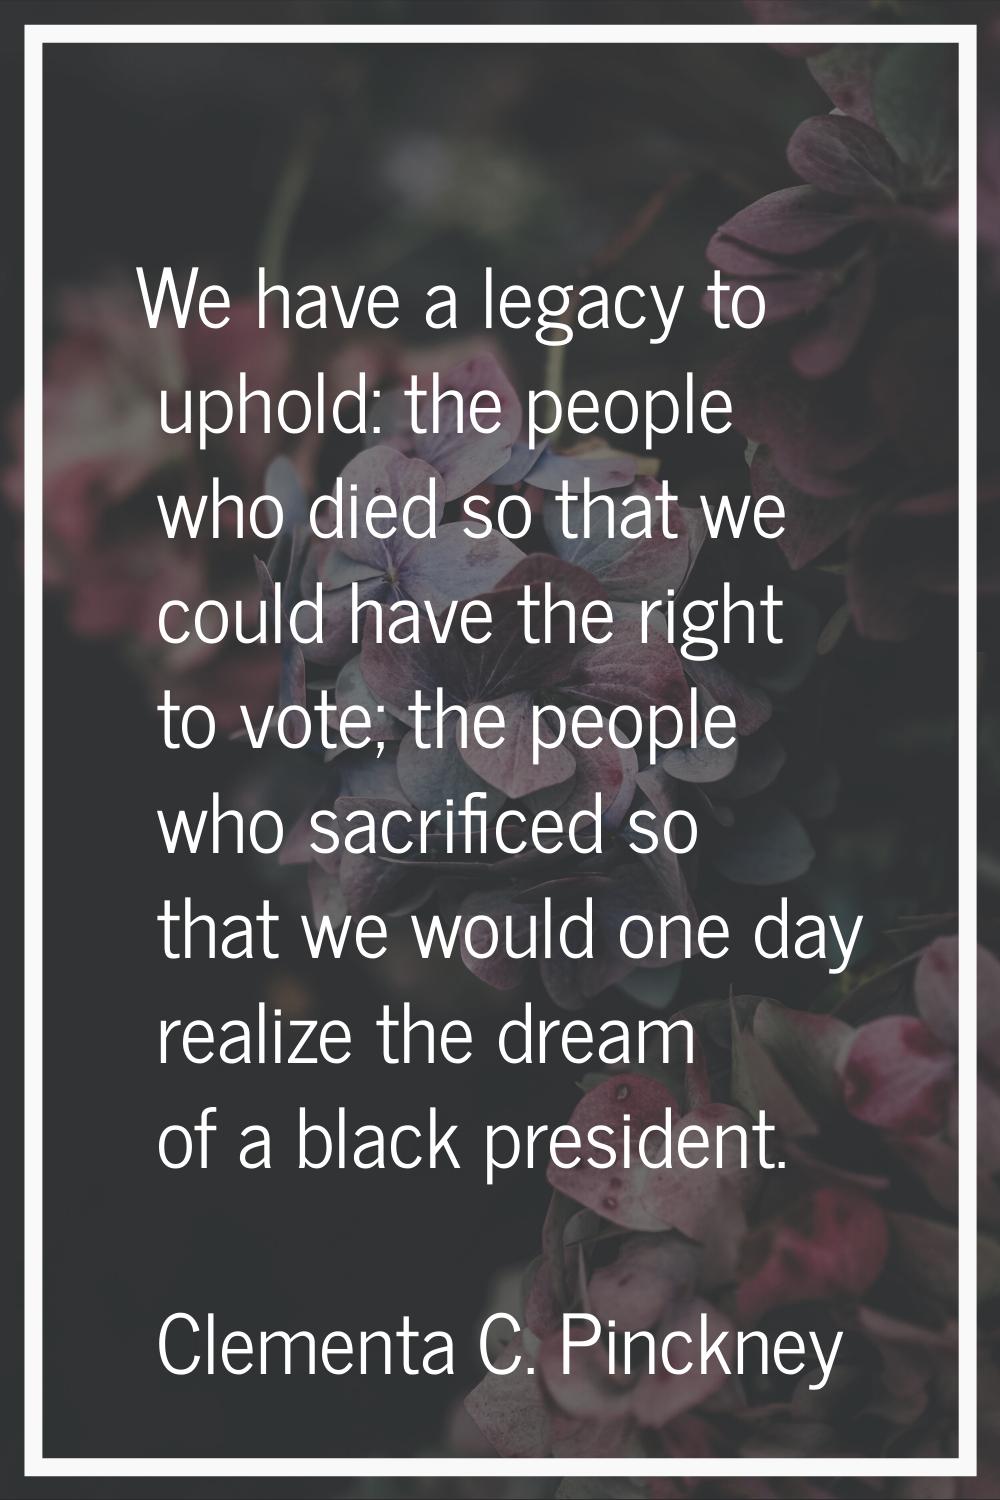 We have a legacy to uphold: the people who died so that we could have the right to vote; the people